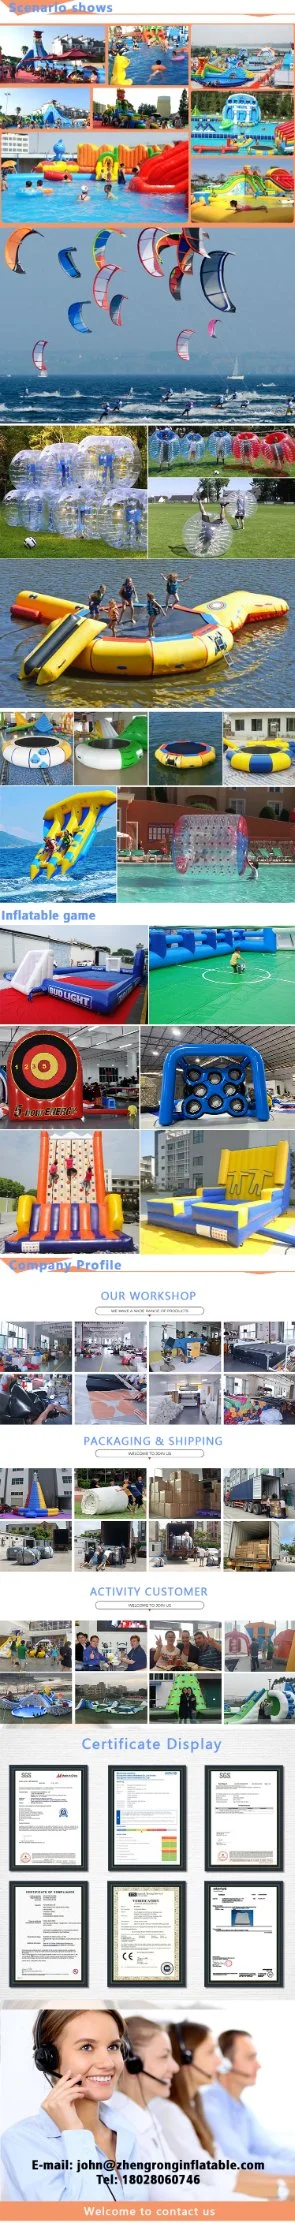 Inflatable Dart Board Inflatable Football Target Outdoor Games Fun Sports Target